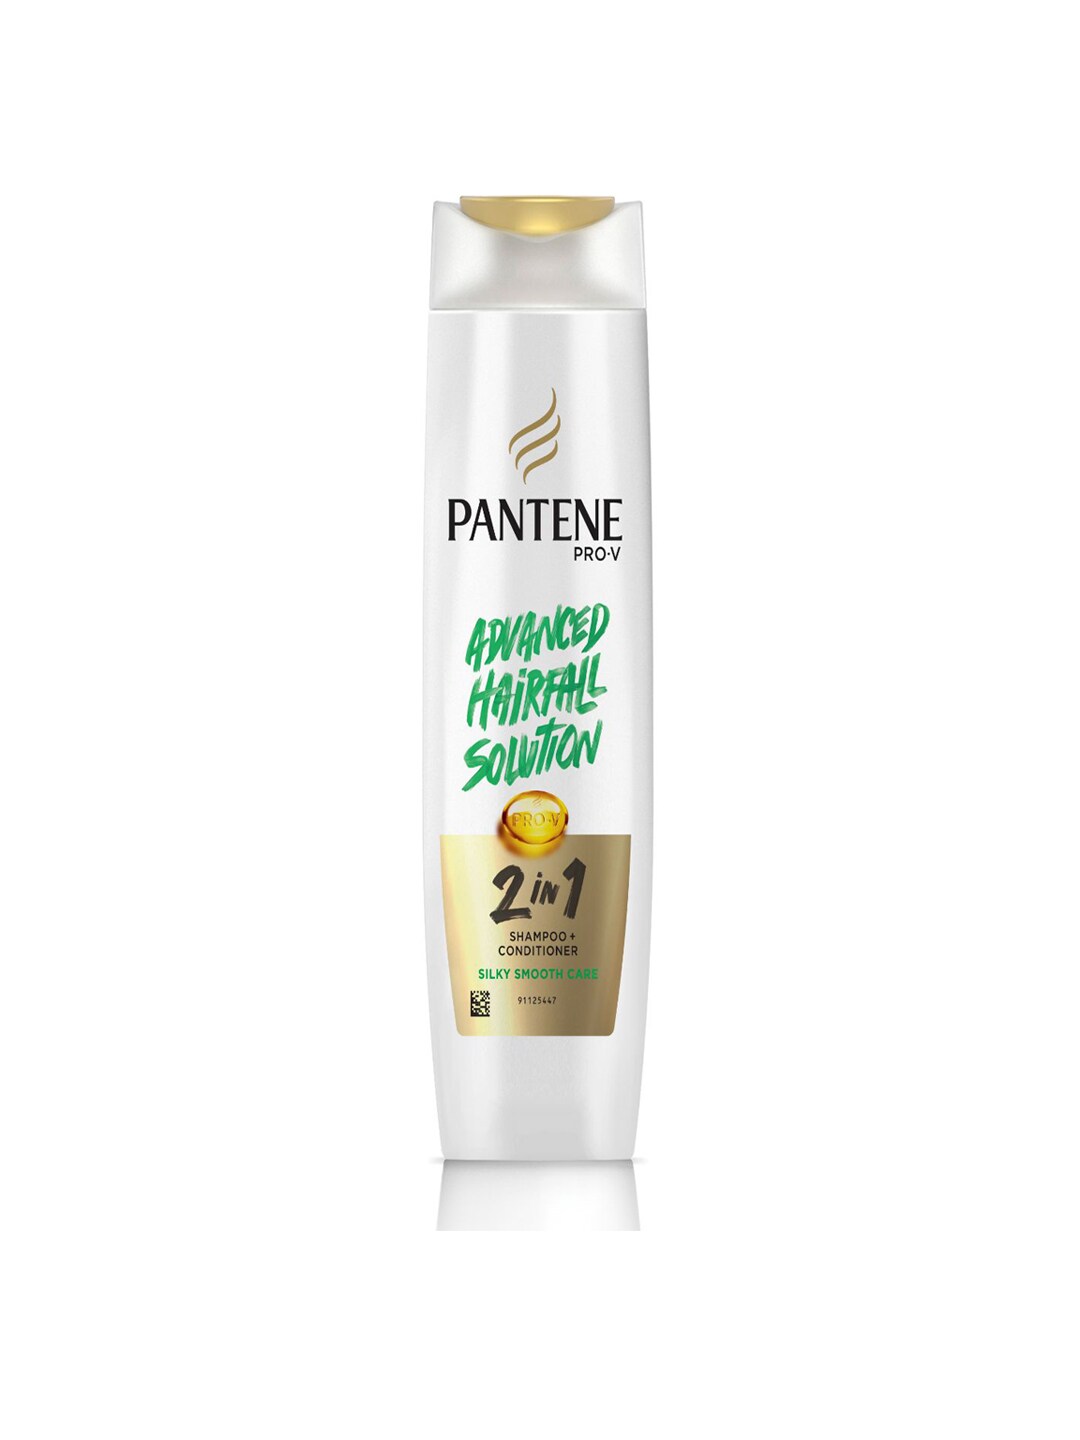 Pantene 2 in 1 Silky Smooth Shampoo + Conditioner 180 ml Price in India